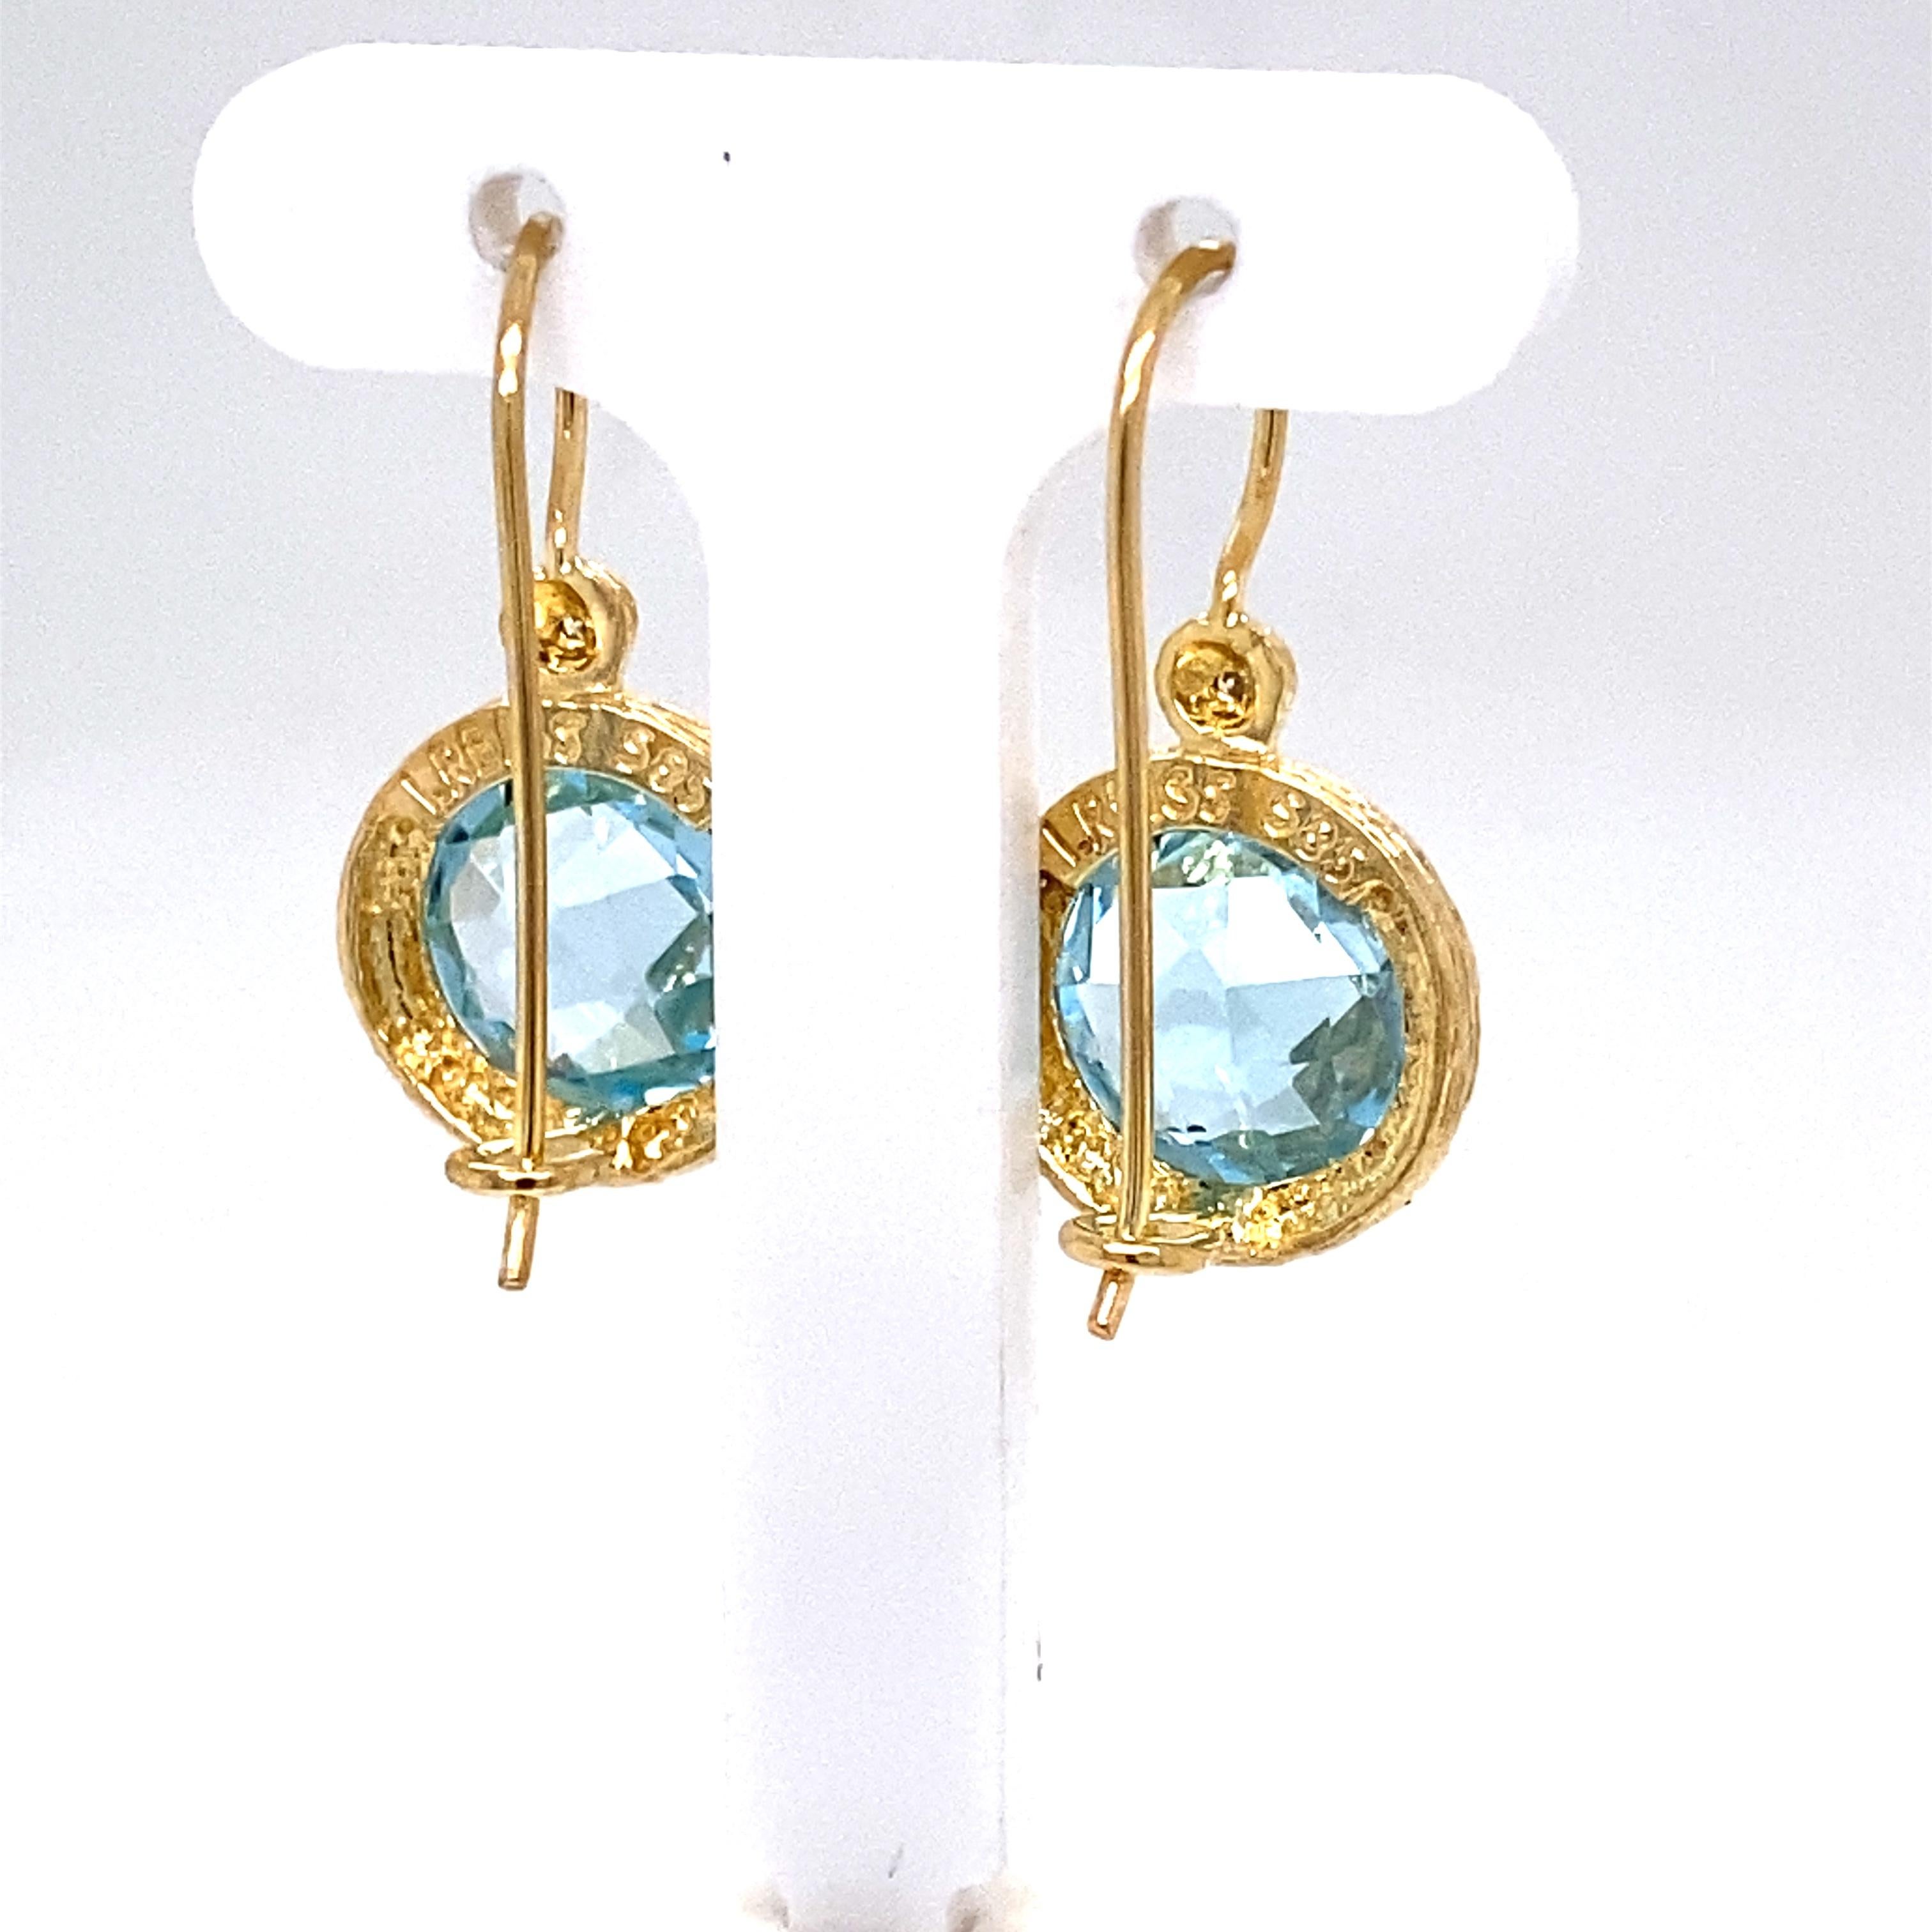 14 Karat Yellow Gold Hand-Crafted Polish-Finished and Textured Drop Earrings, Centered with a 10mm Semi-Precious Round Checkerboard Blue Topaz Color Stone Accented with 0.03 Carats of Bezel Set Diamonds.
